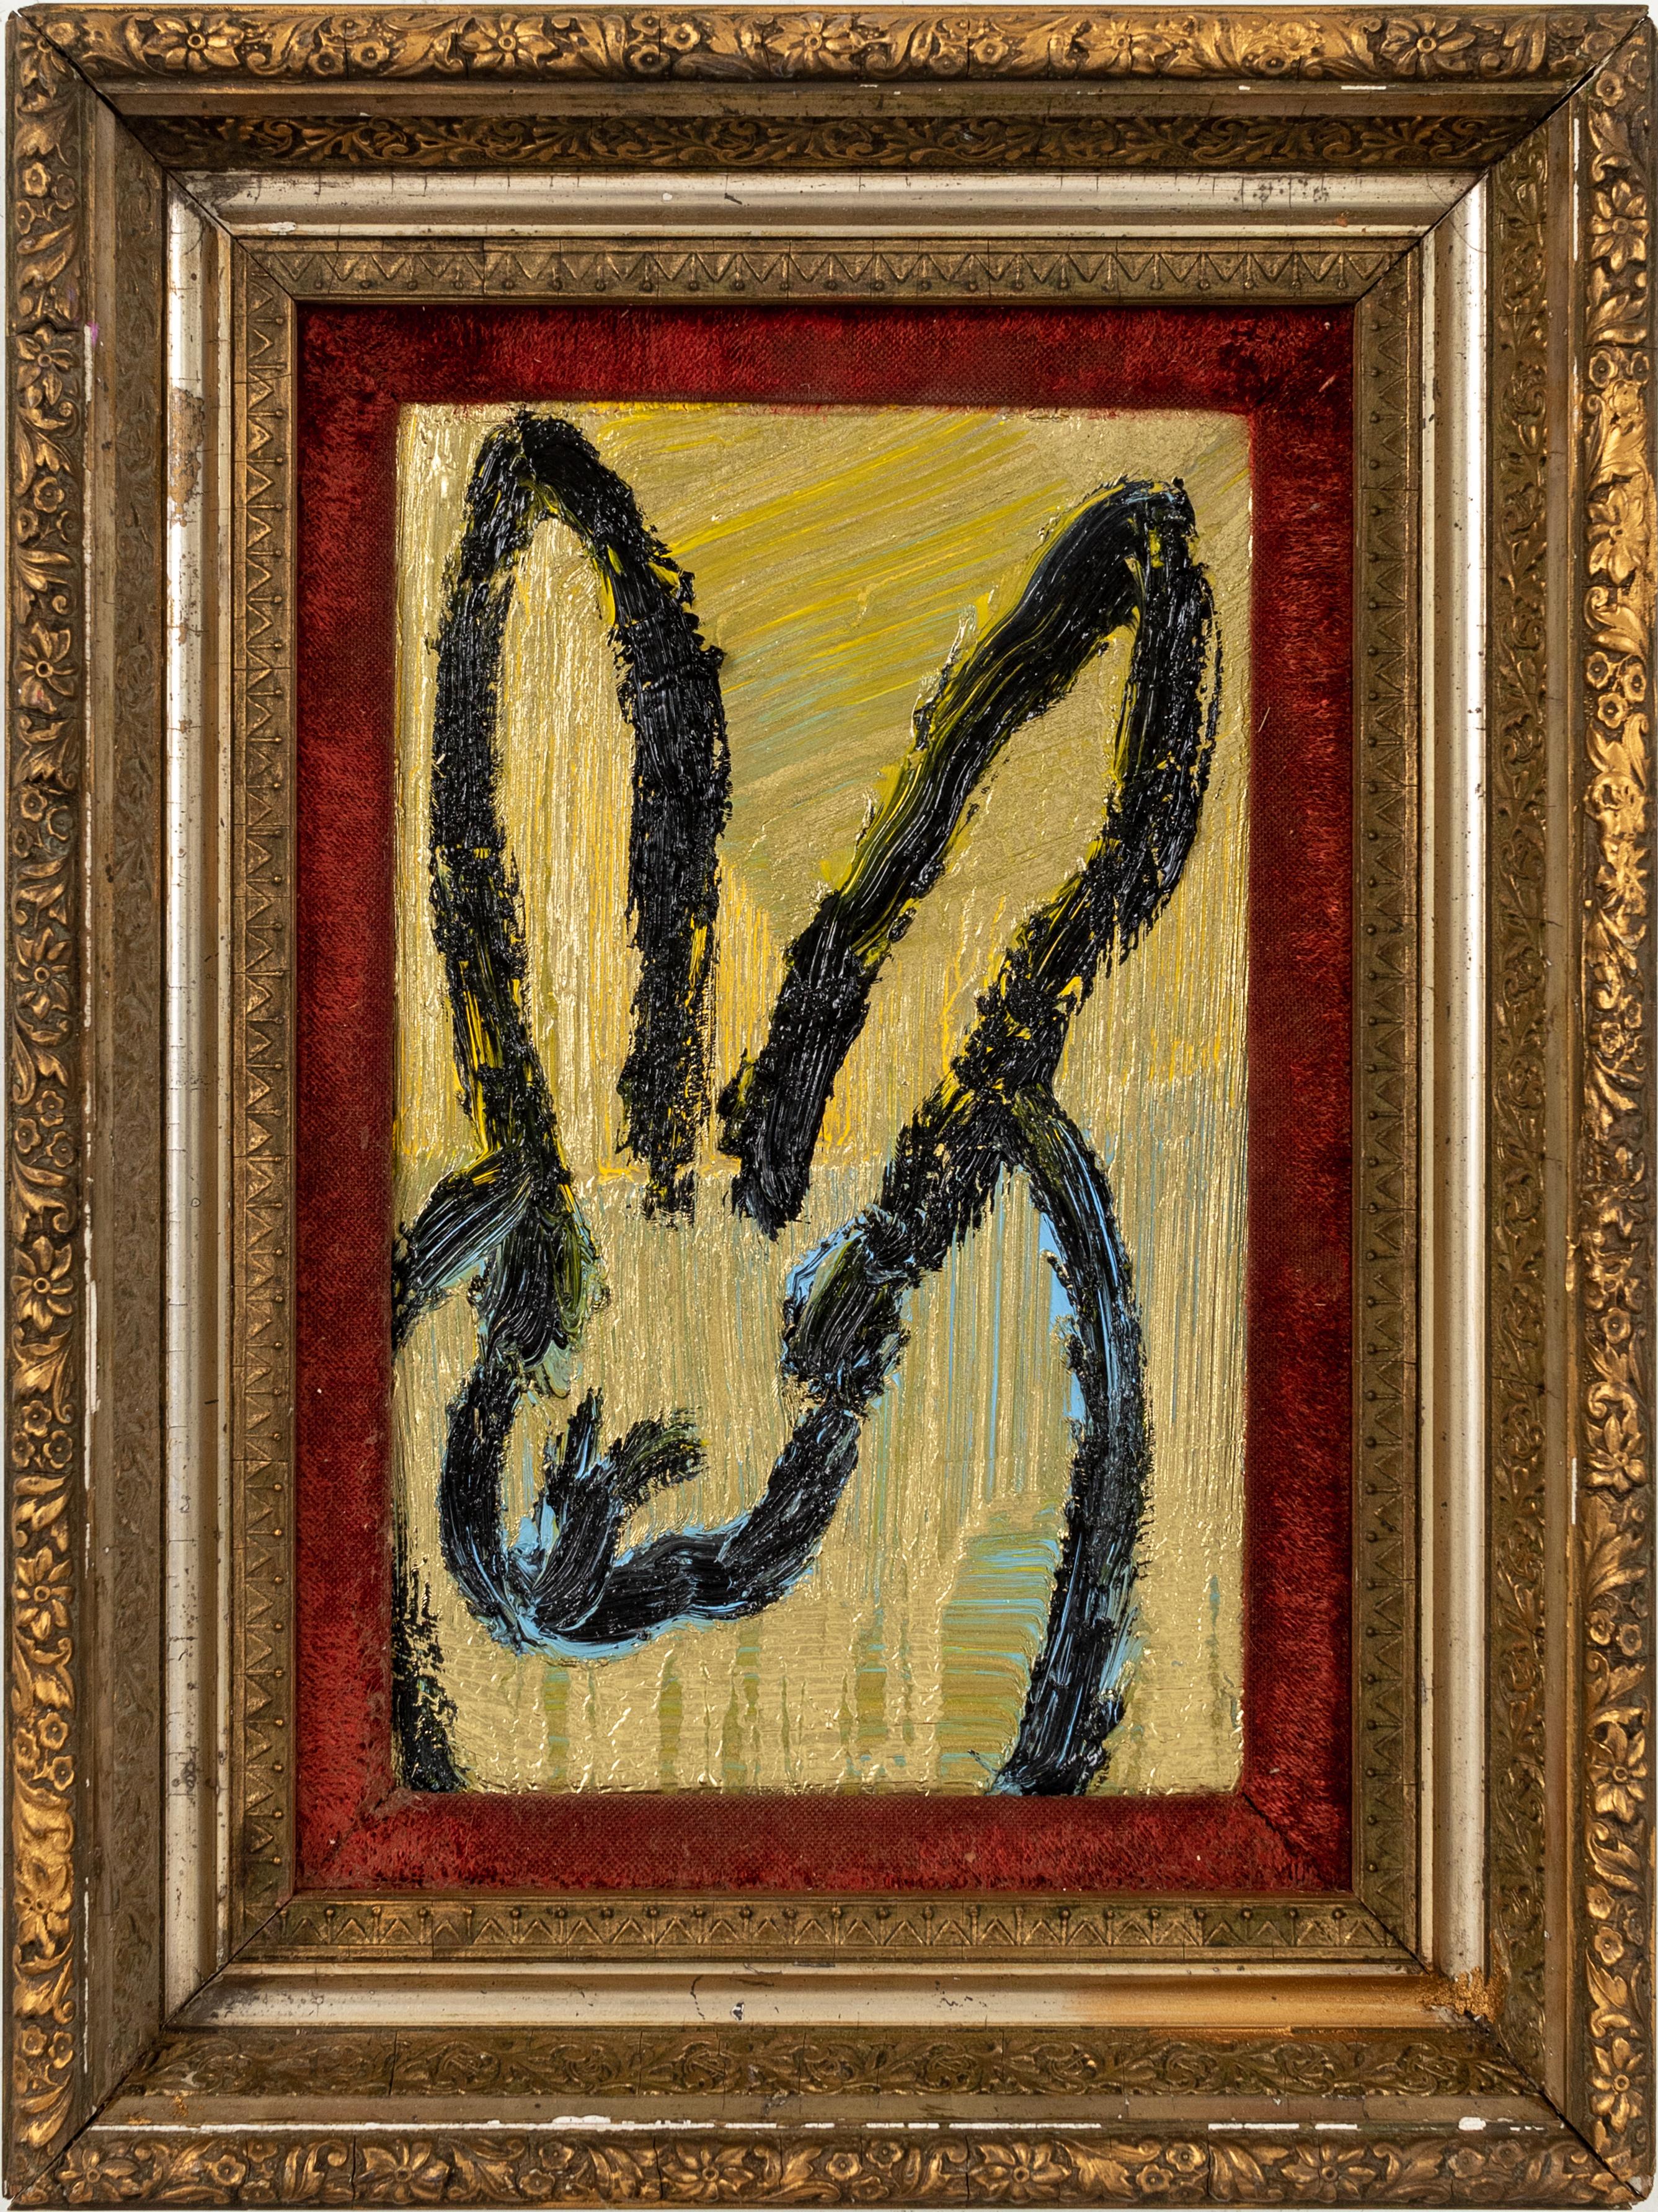 Hunt Slonem "Martin" Gold Metallic Bunny
Black outlined bunny on gold and light blue metallic background in an antique frame 

Unframed: 12 x 7.5 inches 
Framed: 17.75 x 13.25 inches 
*painting is framed*  

Hunt Slonem is a well-renowned American